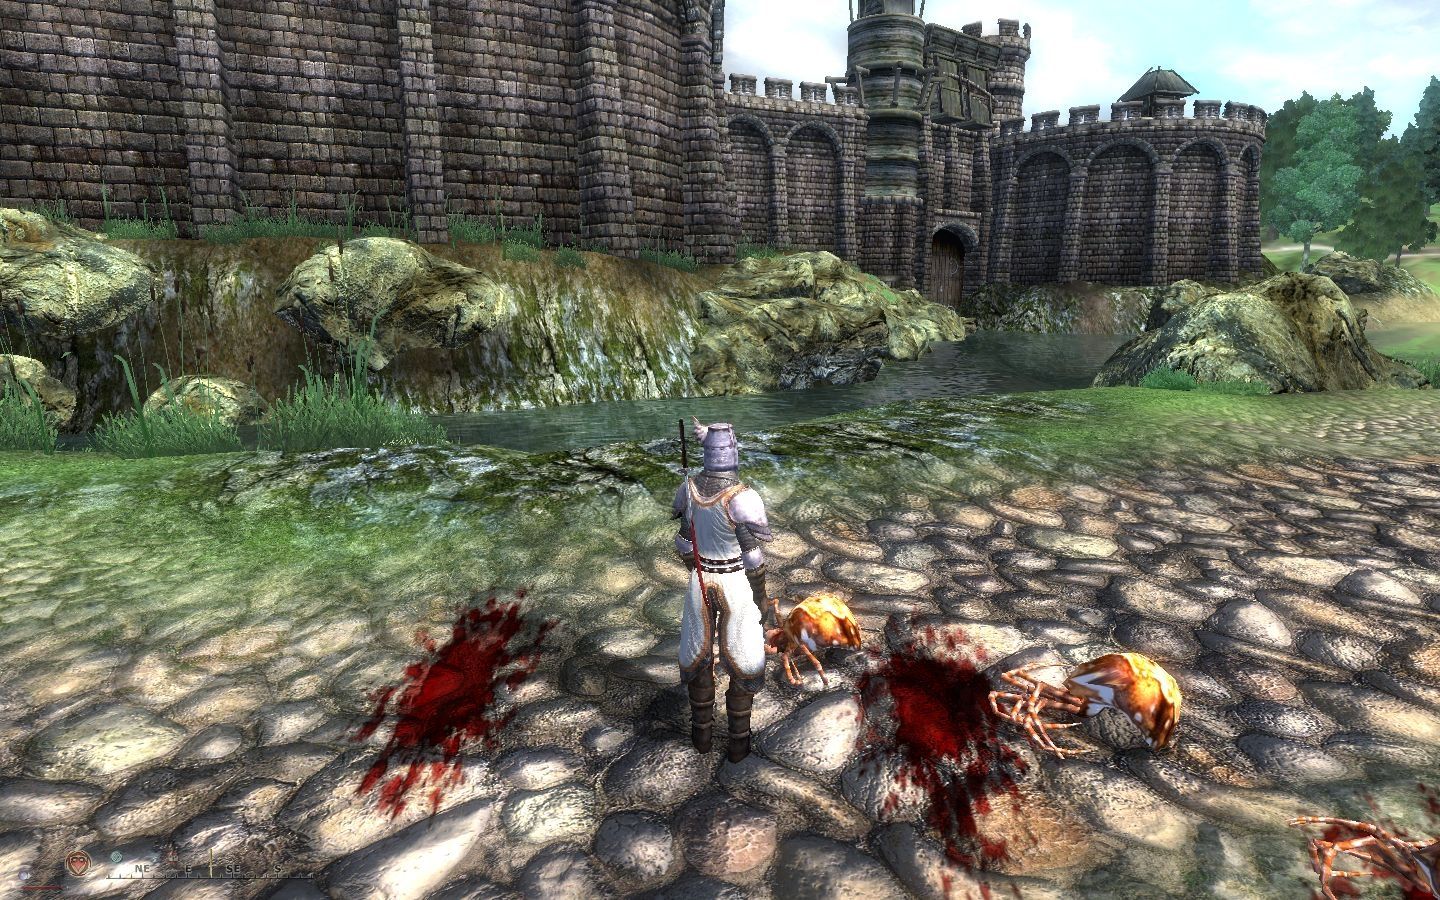 oblvivon mod that tells me why my game crashed